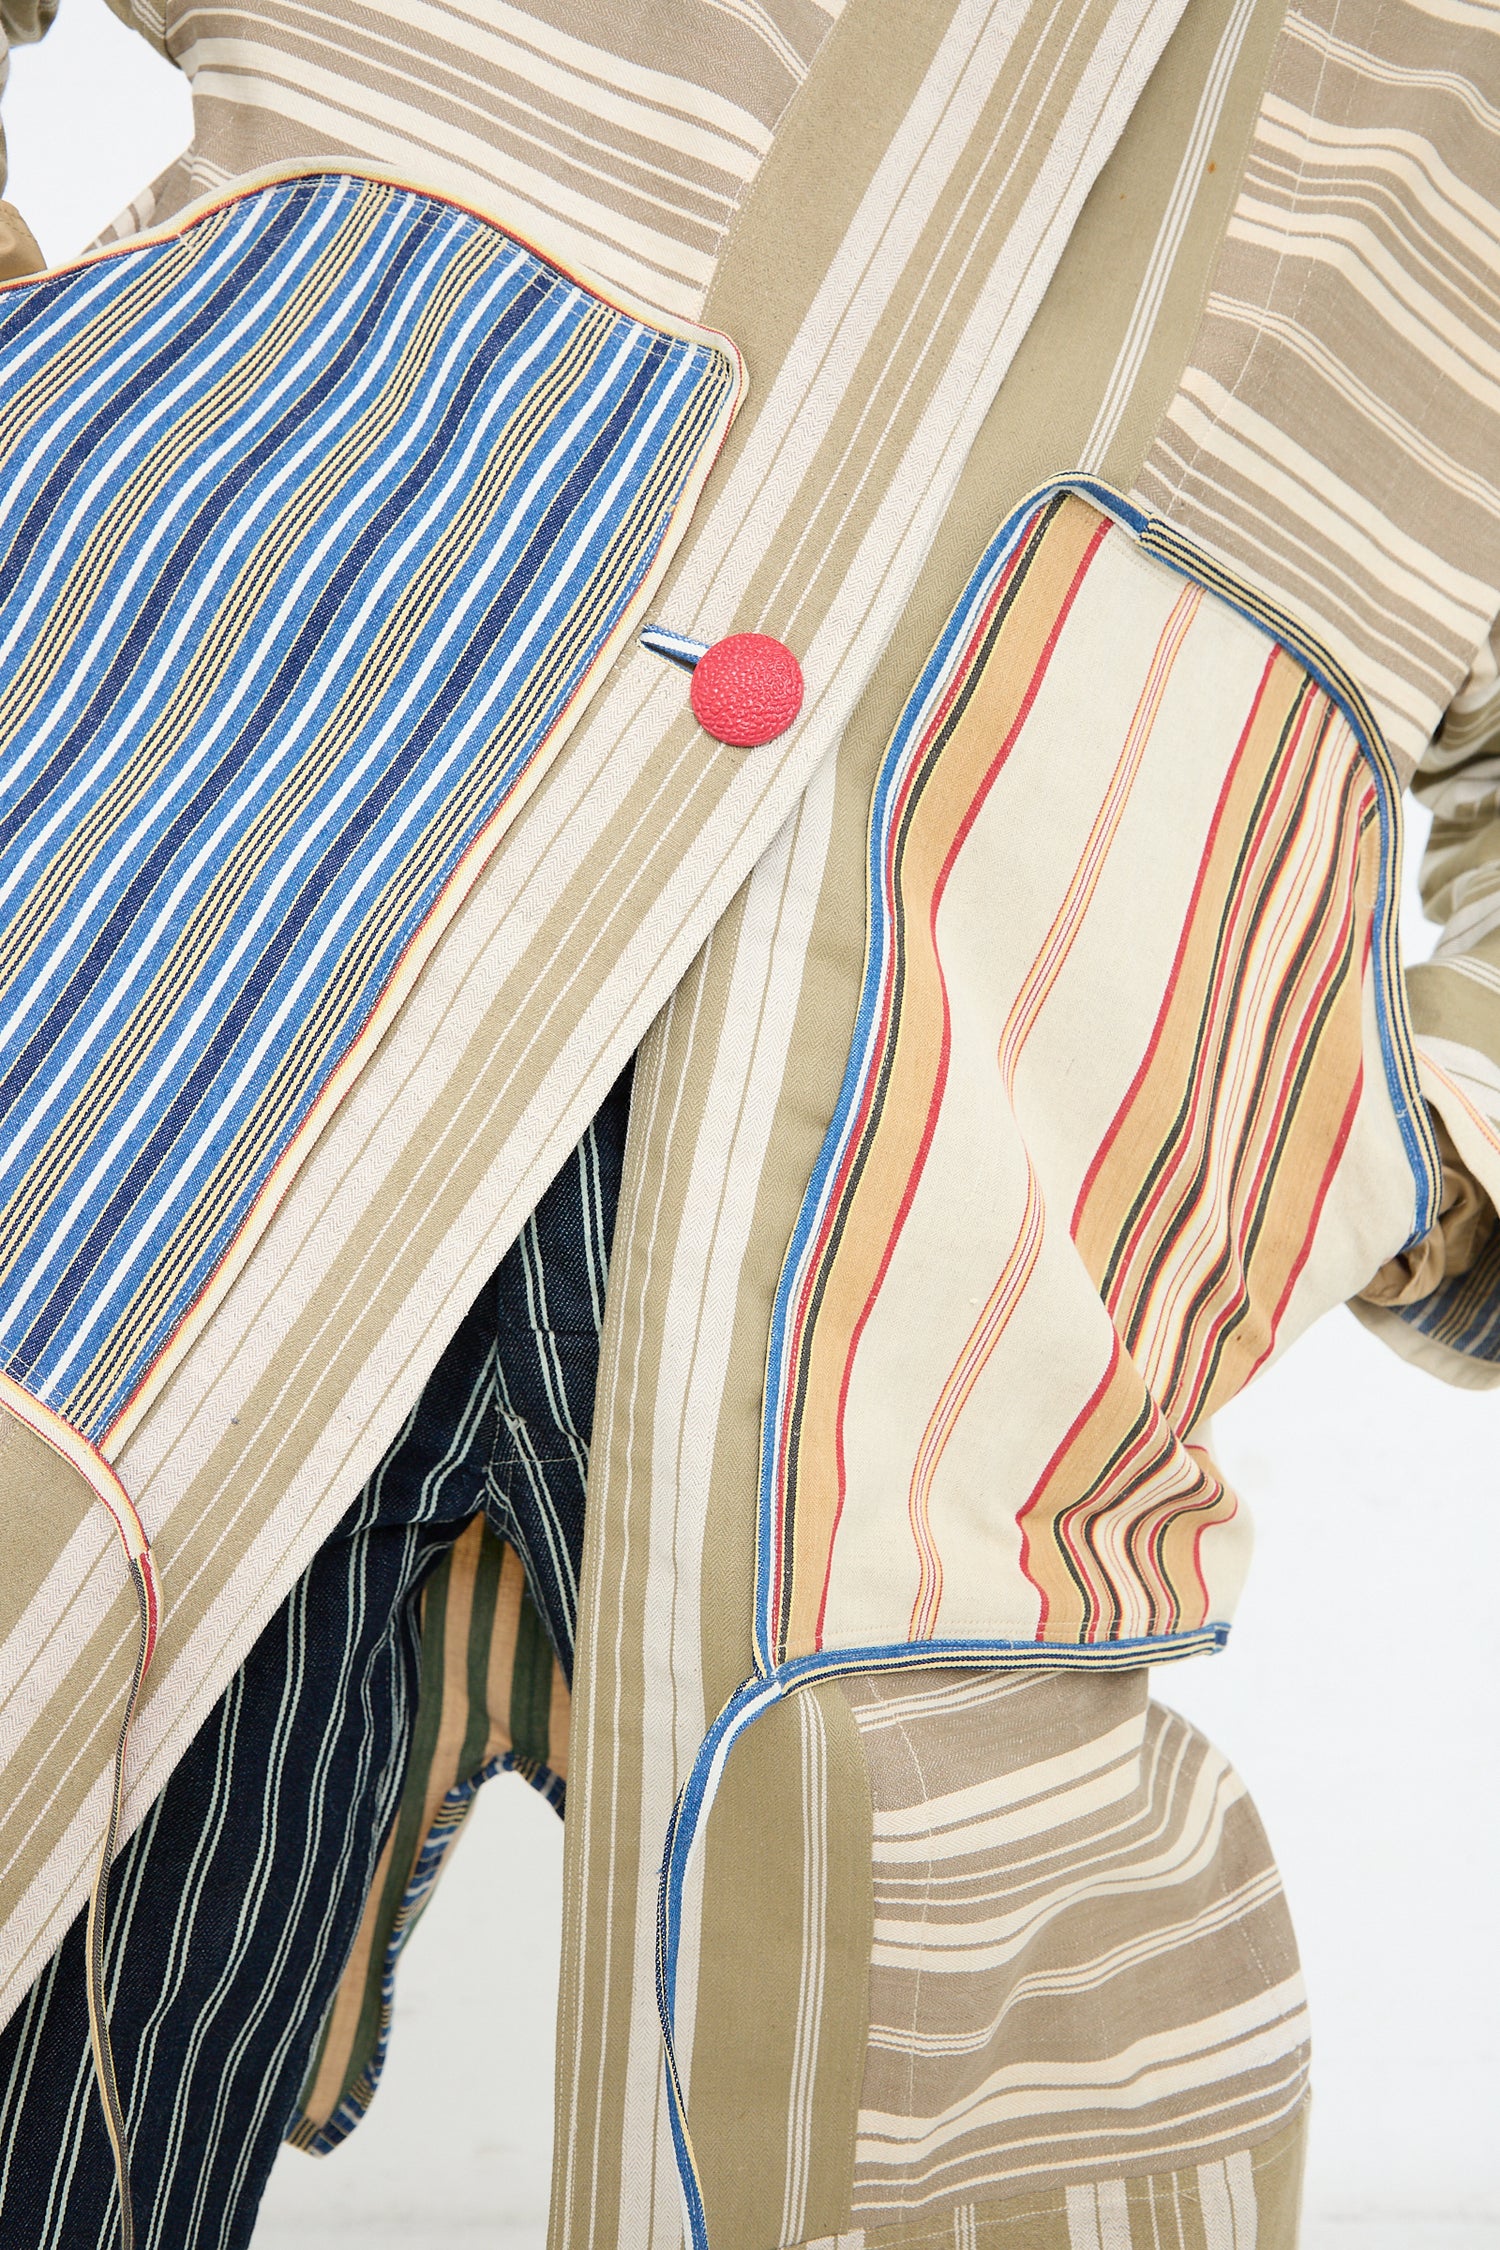 A close-up of a textile artwork featuring an assemblage of vintage cottons and antique Thank You Have A Good Day French Ticking Fishtail Parka, with conspicuous stitching details and a red circular accent.